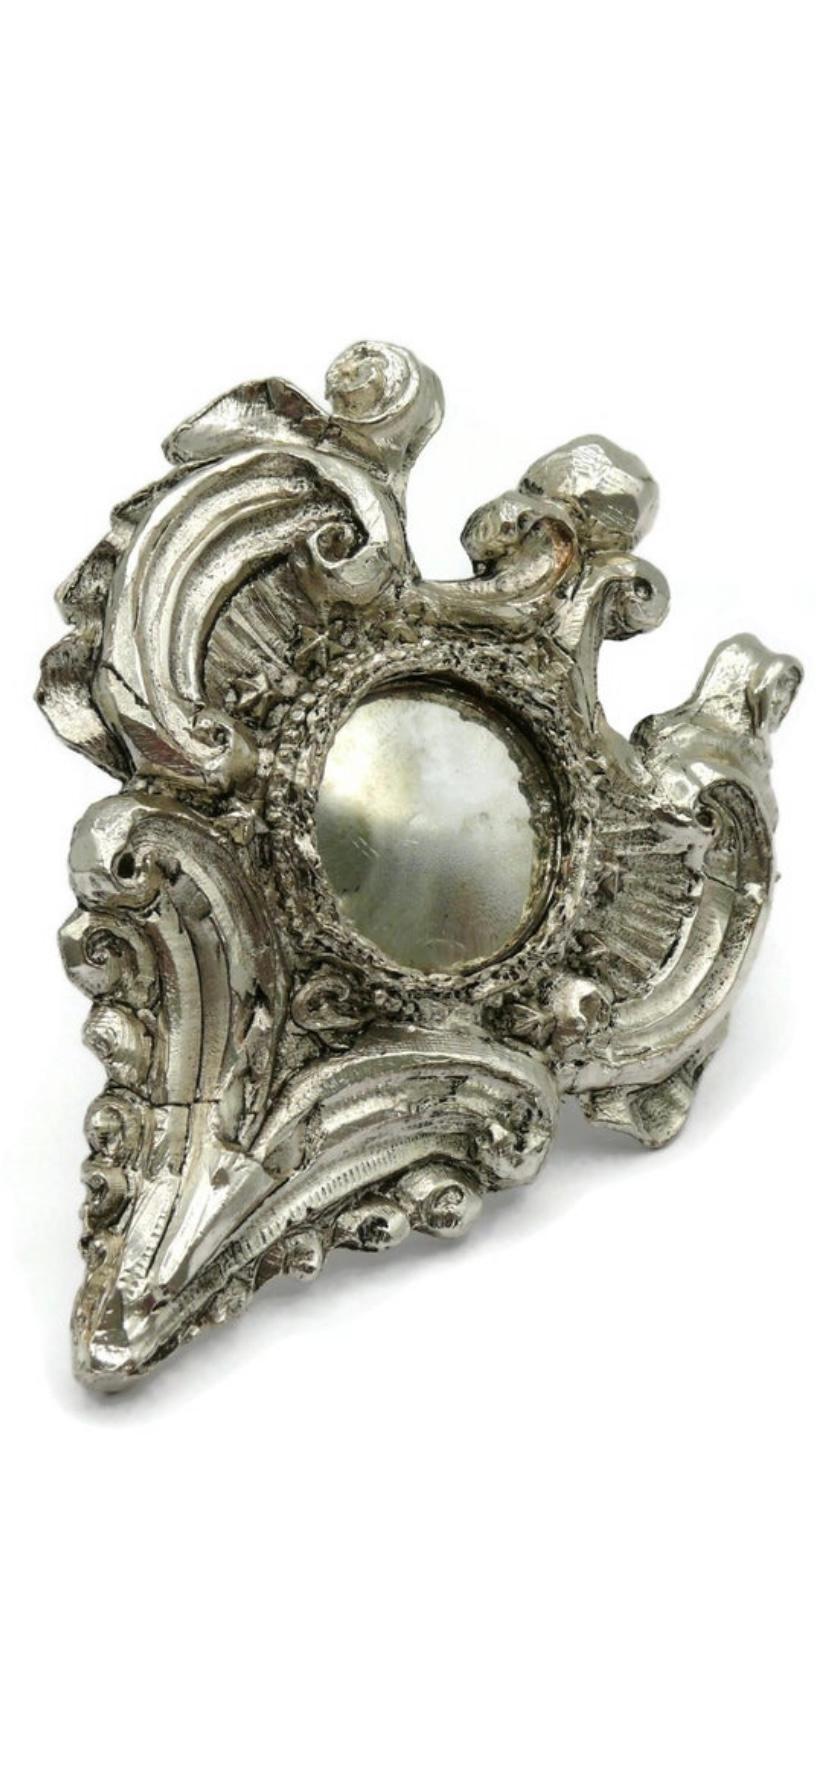 This rare CHRISTIAN LACROIX vintage silver plated brooch is from the Christmas collection of 2007. In the back, you can see the embossed inscription 